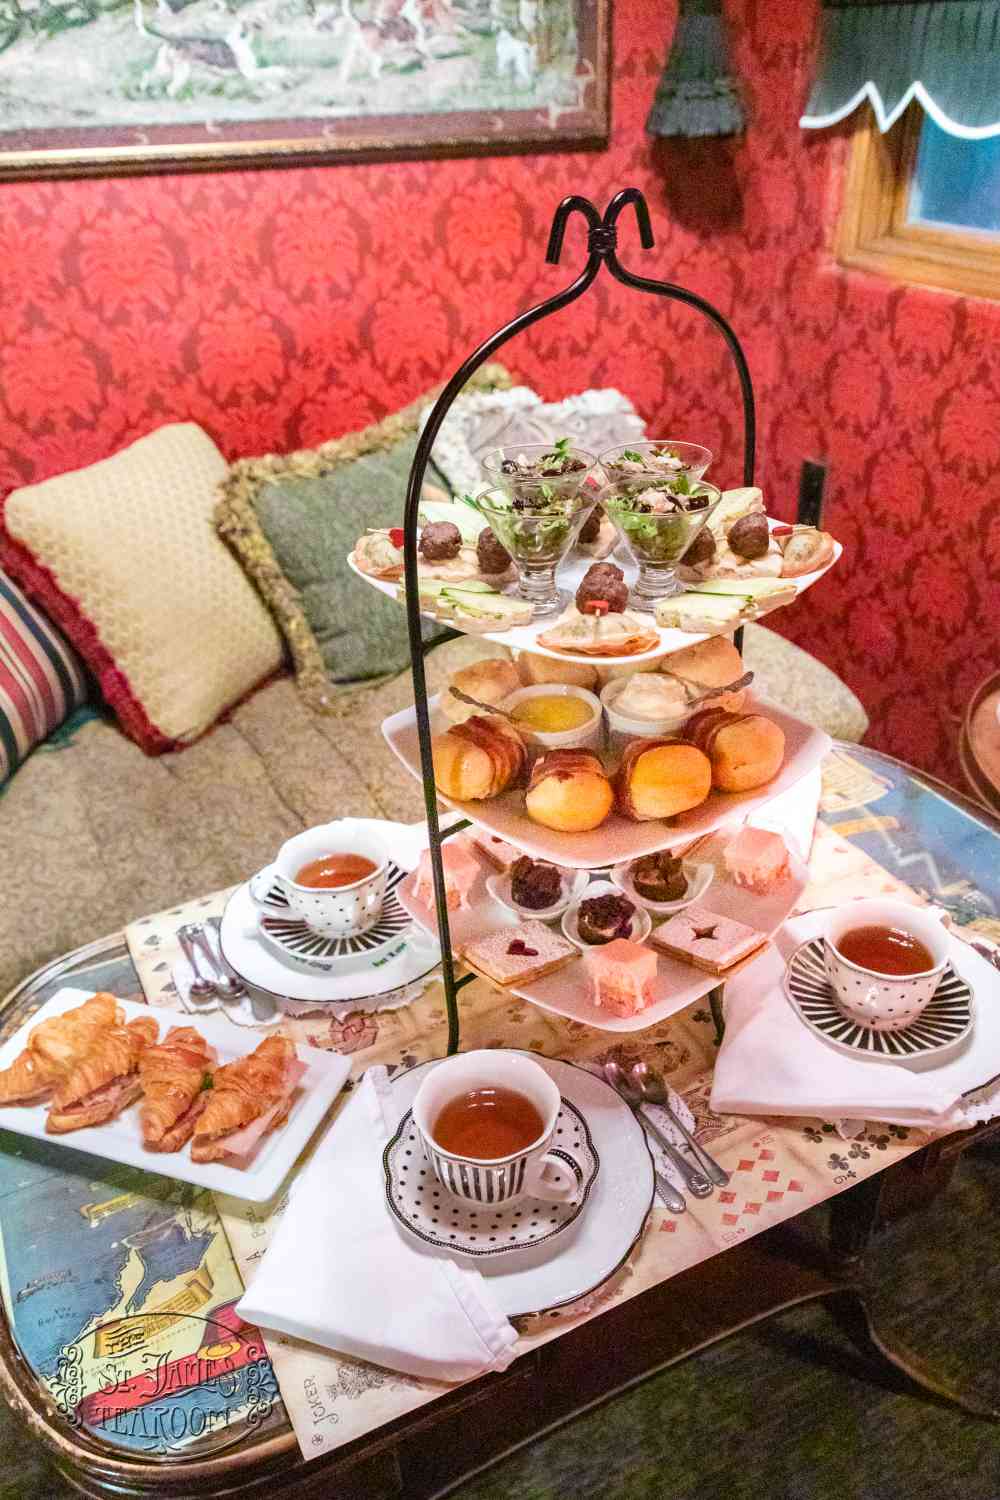 Whimsical Wonderland Afternoon Tea Menu - Dine in Tray for 4